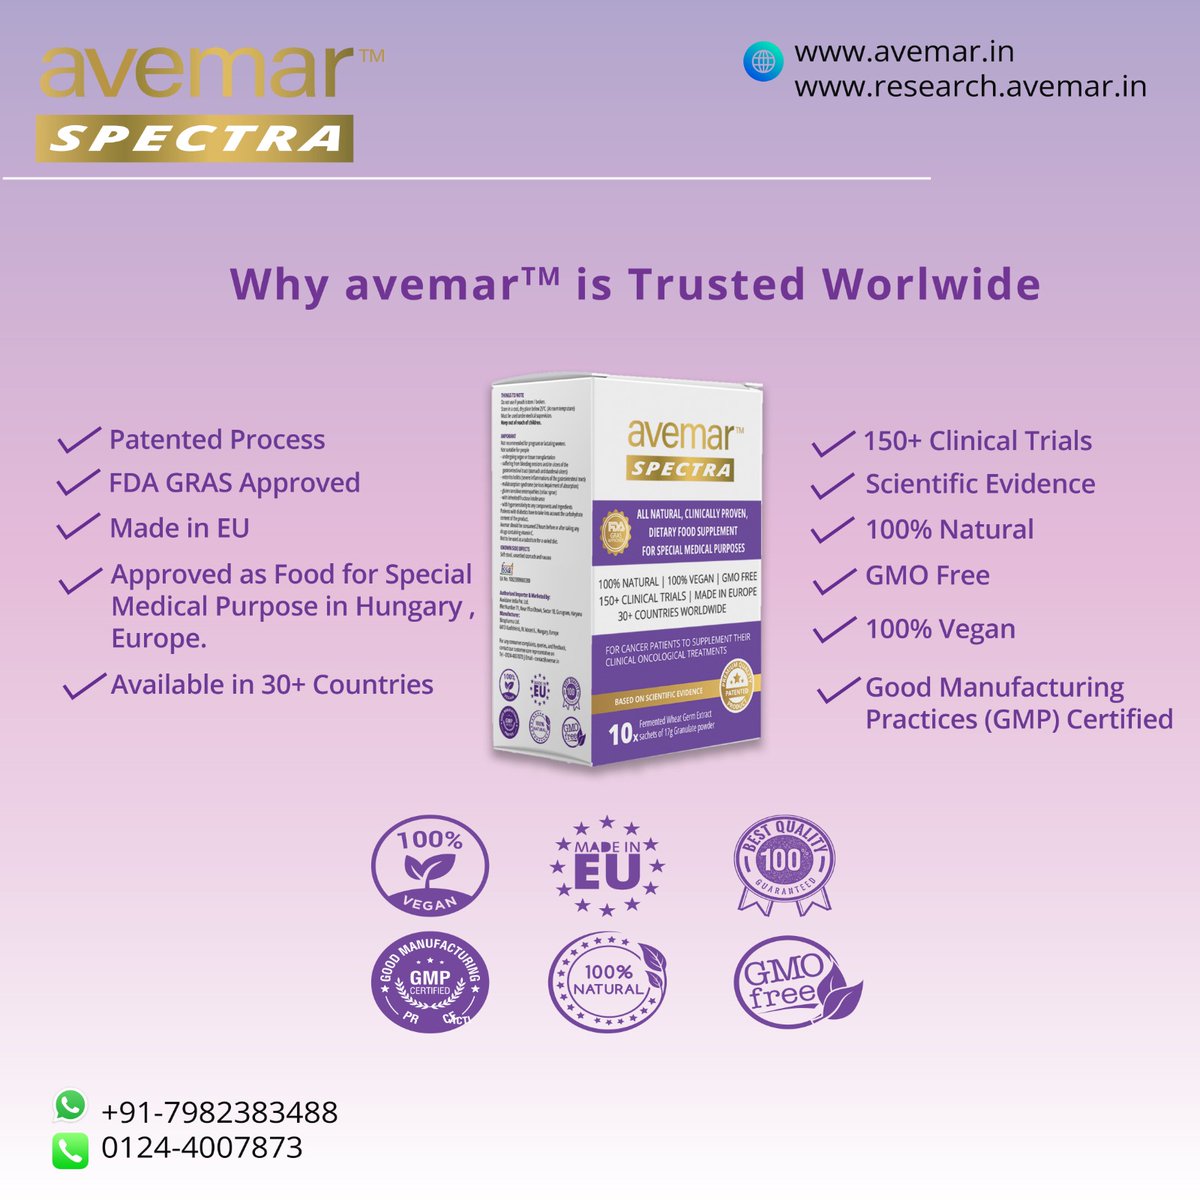 'Join the movement towards vibrant health with Avemar Spectra. 🌟 #HealthMovement #AvemarWellbeing'
#avemarspectra
#cáncerwarriors
#naturalhealing
#fermentedsupplements
#radiotherapy
#chemotherapy
#oncologist
#Everyone